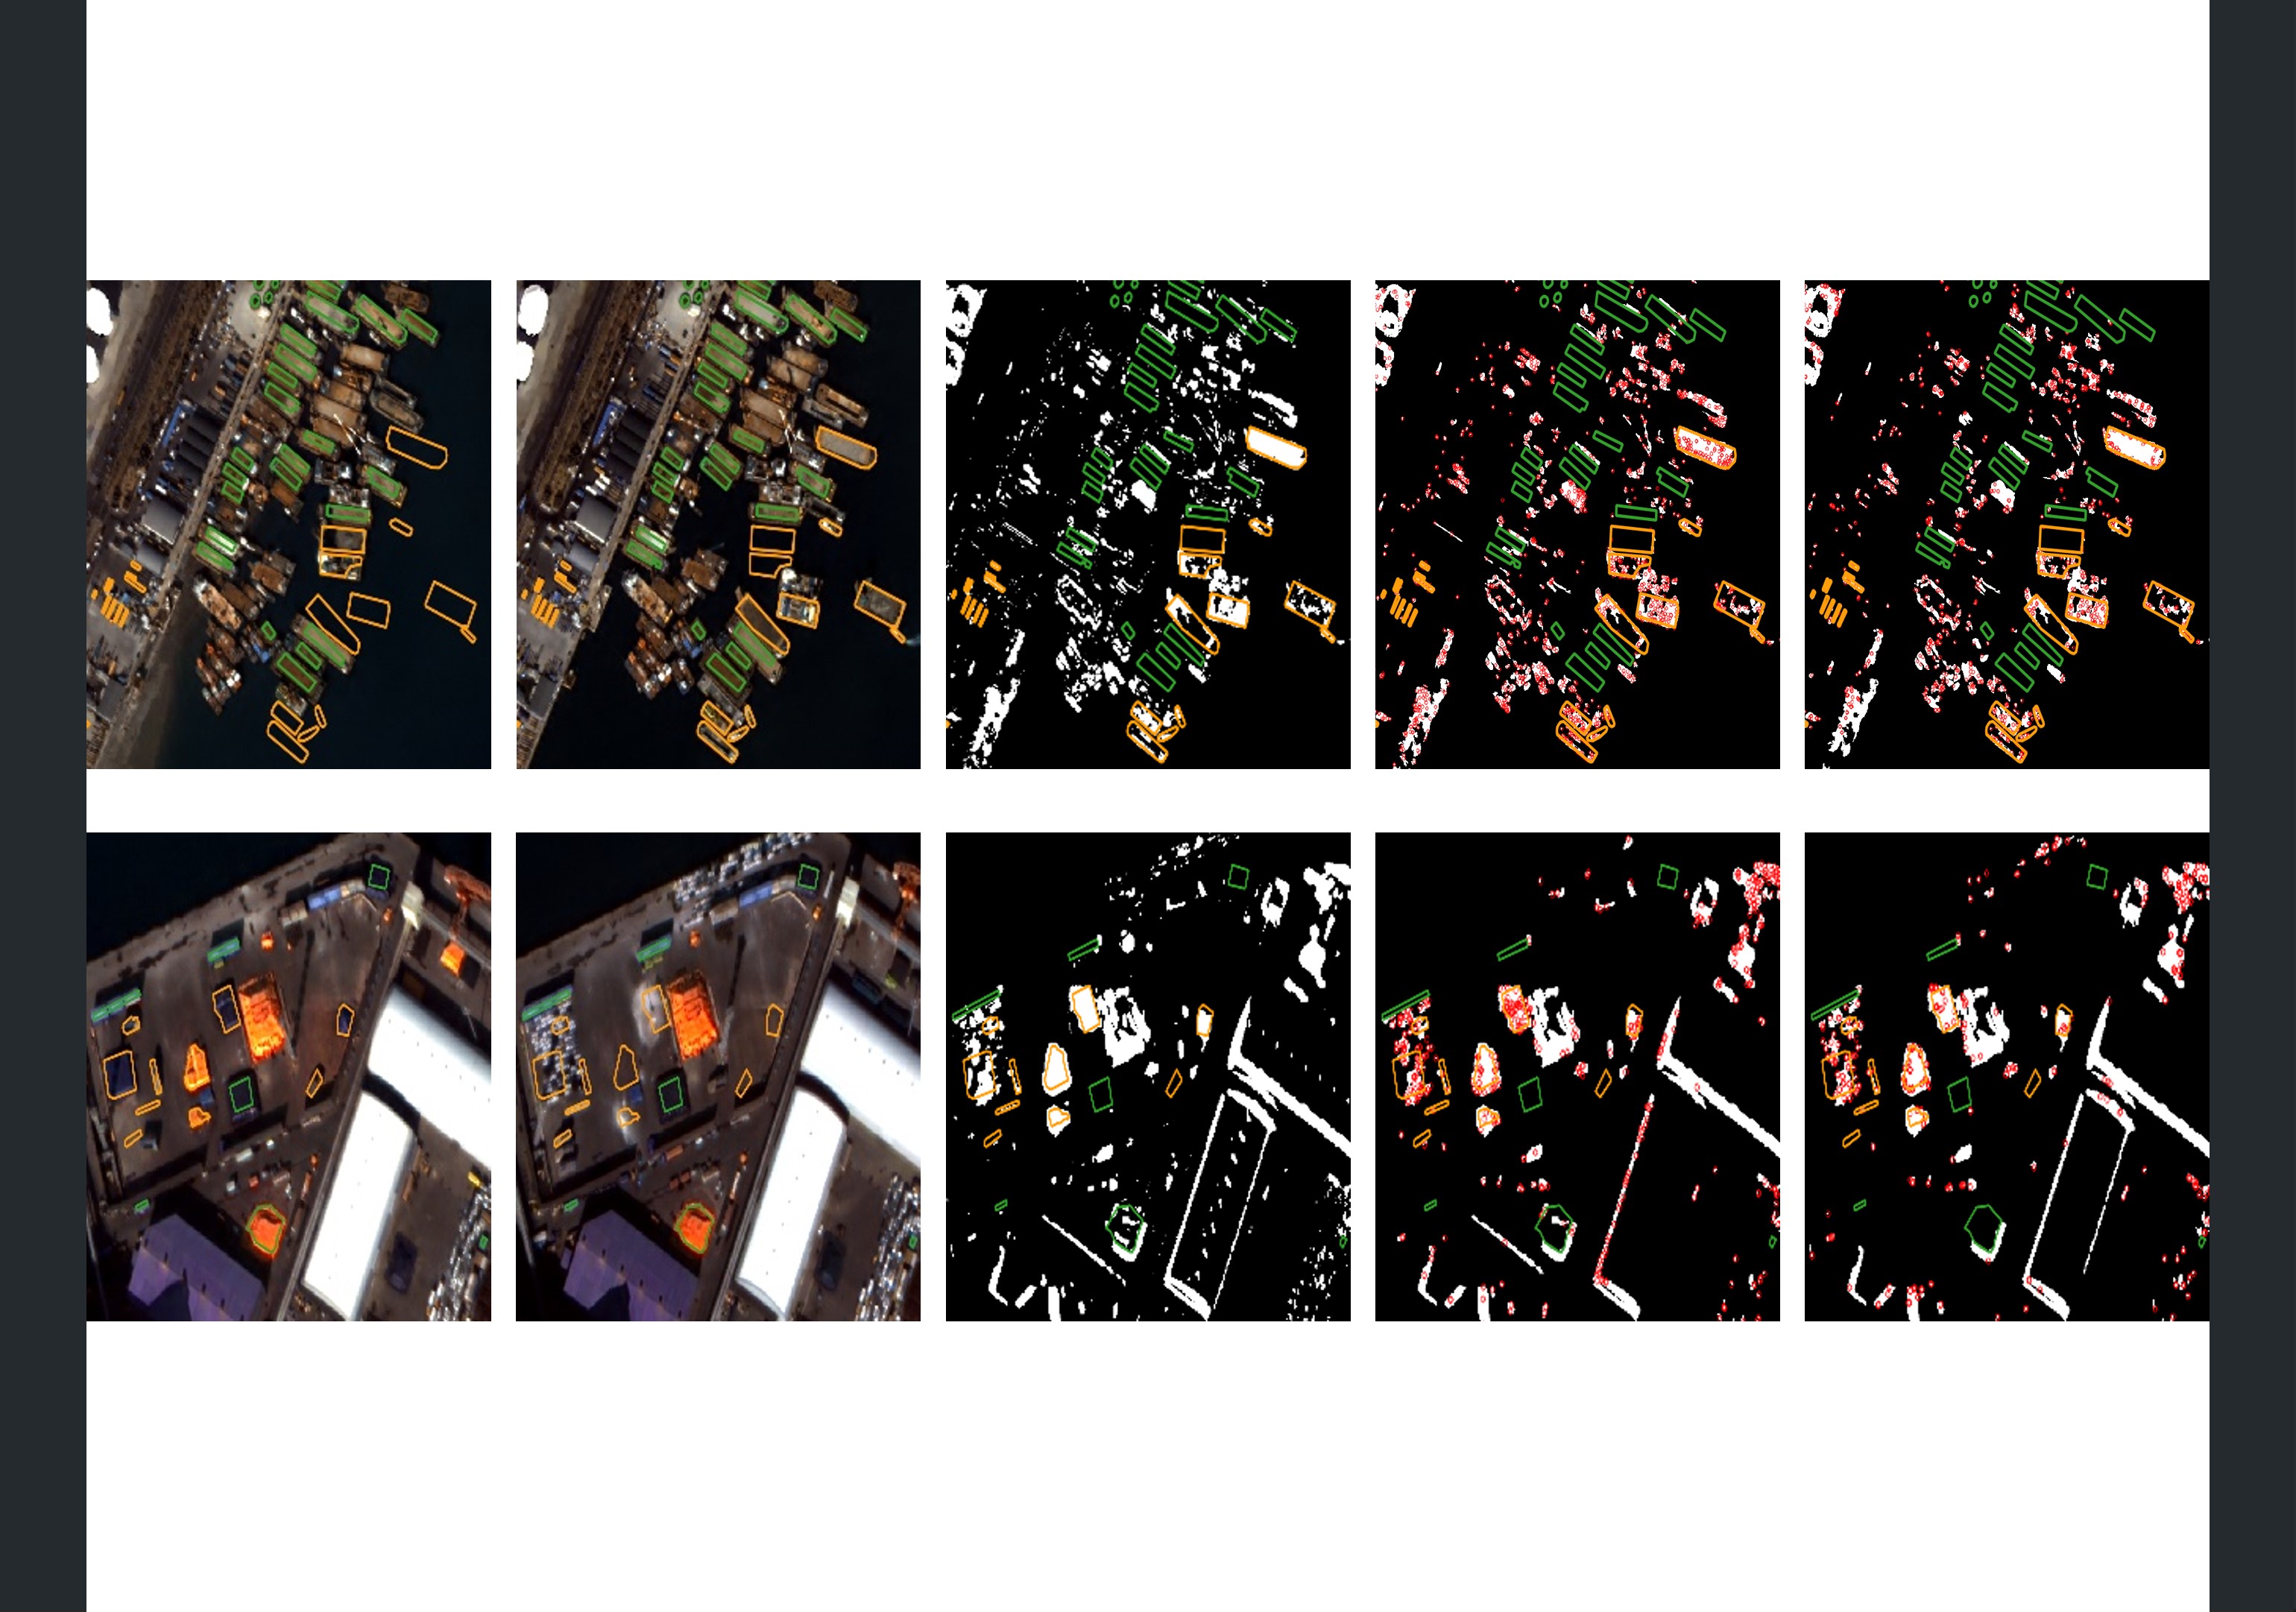 This research proposes a new approach to small-object change detection from high-resolution satellite images. 
										 We take an unsupervised approach with a small amount of computation time to detect change candidates so that a sophisticated supervised approach 
										 can be applied later with fewer candidates. We propose using feature points that can be quickly extracted from high-resolution satellite images 
										 as a suitable unit of change for small objects. We showed that our approach outperformed the pixel-based approach by producing higher precision 
										 and recall at a fixed false alarm rate. Our approach is unique in the sense that the feature-based approach is newly proposed for change detection. 
										 We showed that our feature-based approach was less noisy than pixel-based approaches. We also showed that our approach could compensate for the disadvantages 
										 of supervised object-based approaches by successfully reducing the number of change candidates. <br><br>
                                         <h5>Applications</h5>
                                          <ul>
                                           <li>Feature-based change detection of small objects</li>
                                          </ul>
                                         <br>
                                         <h5>Publications</h5>
                                         <ul>
                                         <li>
											소형객체 변화탐지를 위한 화소기반 변화탐지기법의 성능 비교분석(Comparison of Pixel-based Change Detection Methods for Detecting Changes on Small Objects), 서정훈, 박원규, 김태정, 
											2021, 대한원격탐사학회지, 37(2):177-198.
                                         </li>
                                         </ul>
                                     